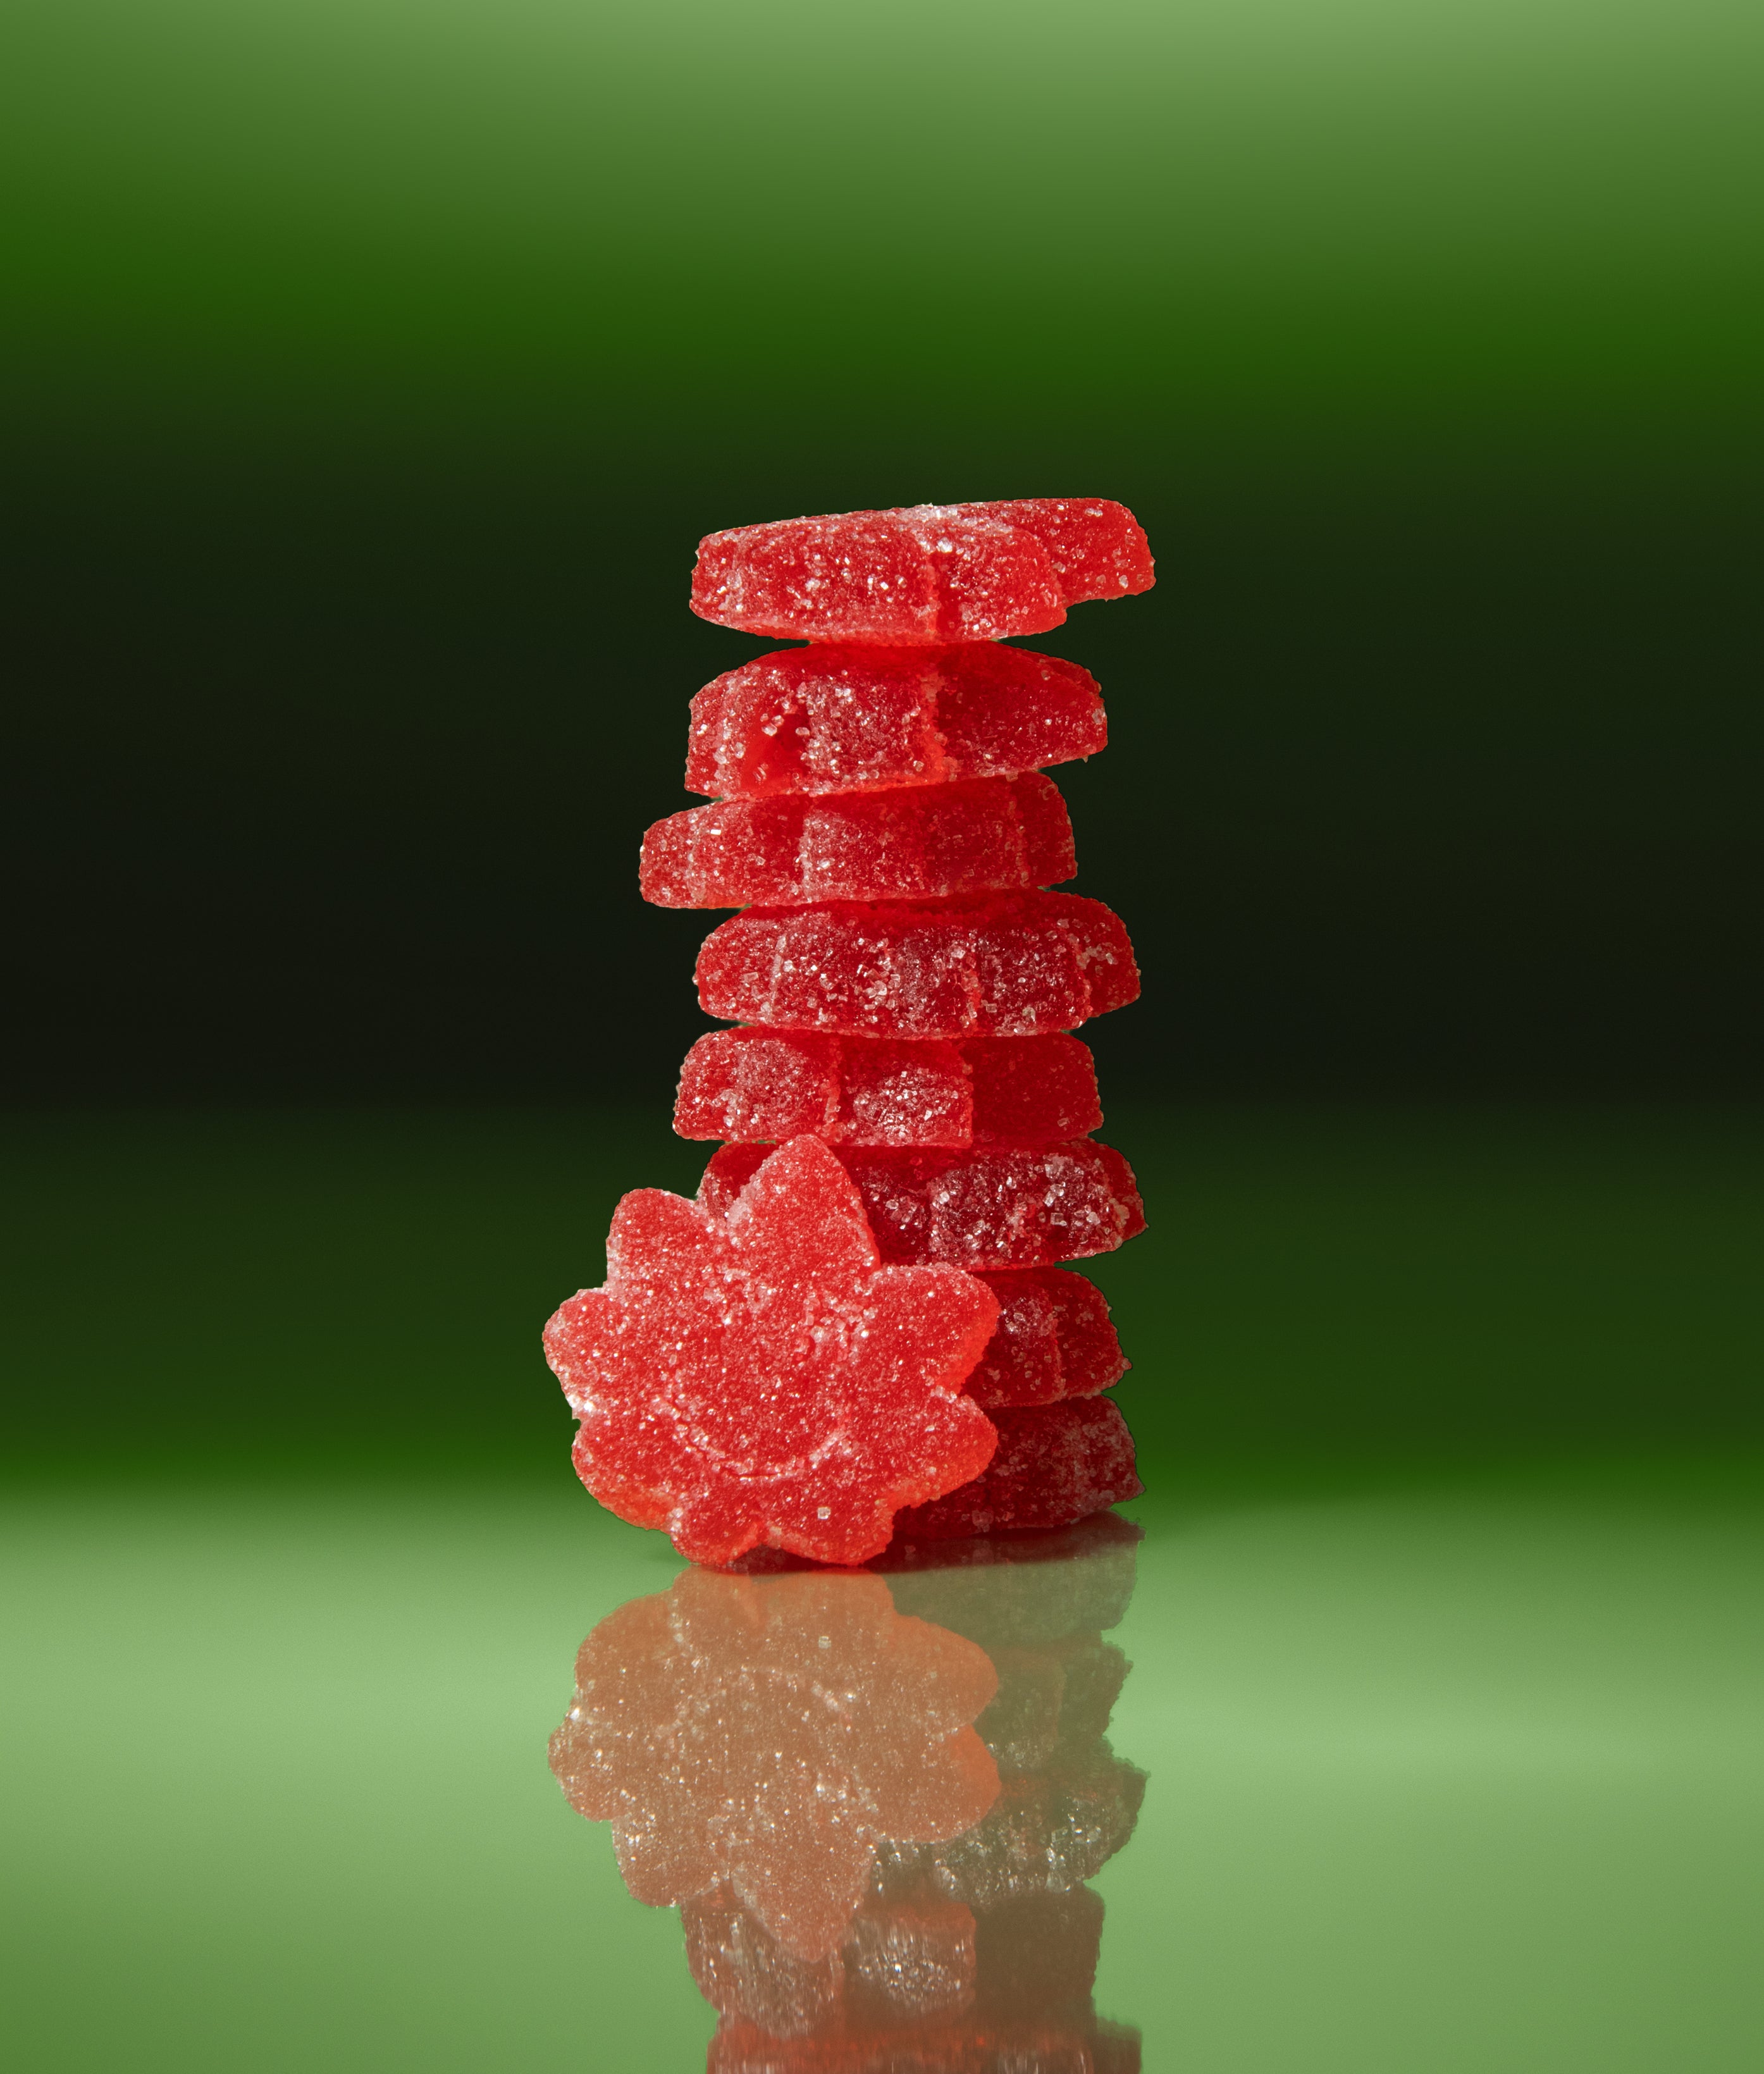 Vegan, all natural, sour watermelon gummies. Deliciously stacked in a pile, ready to be eaten!